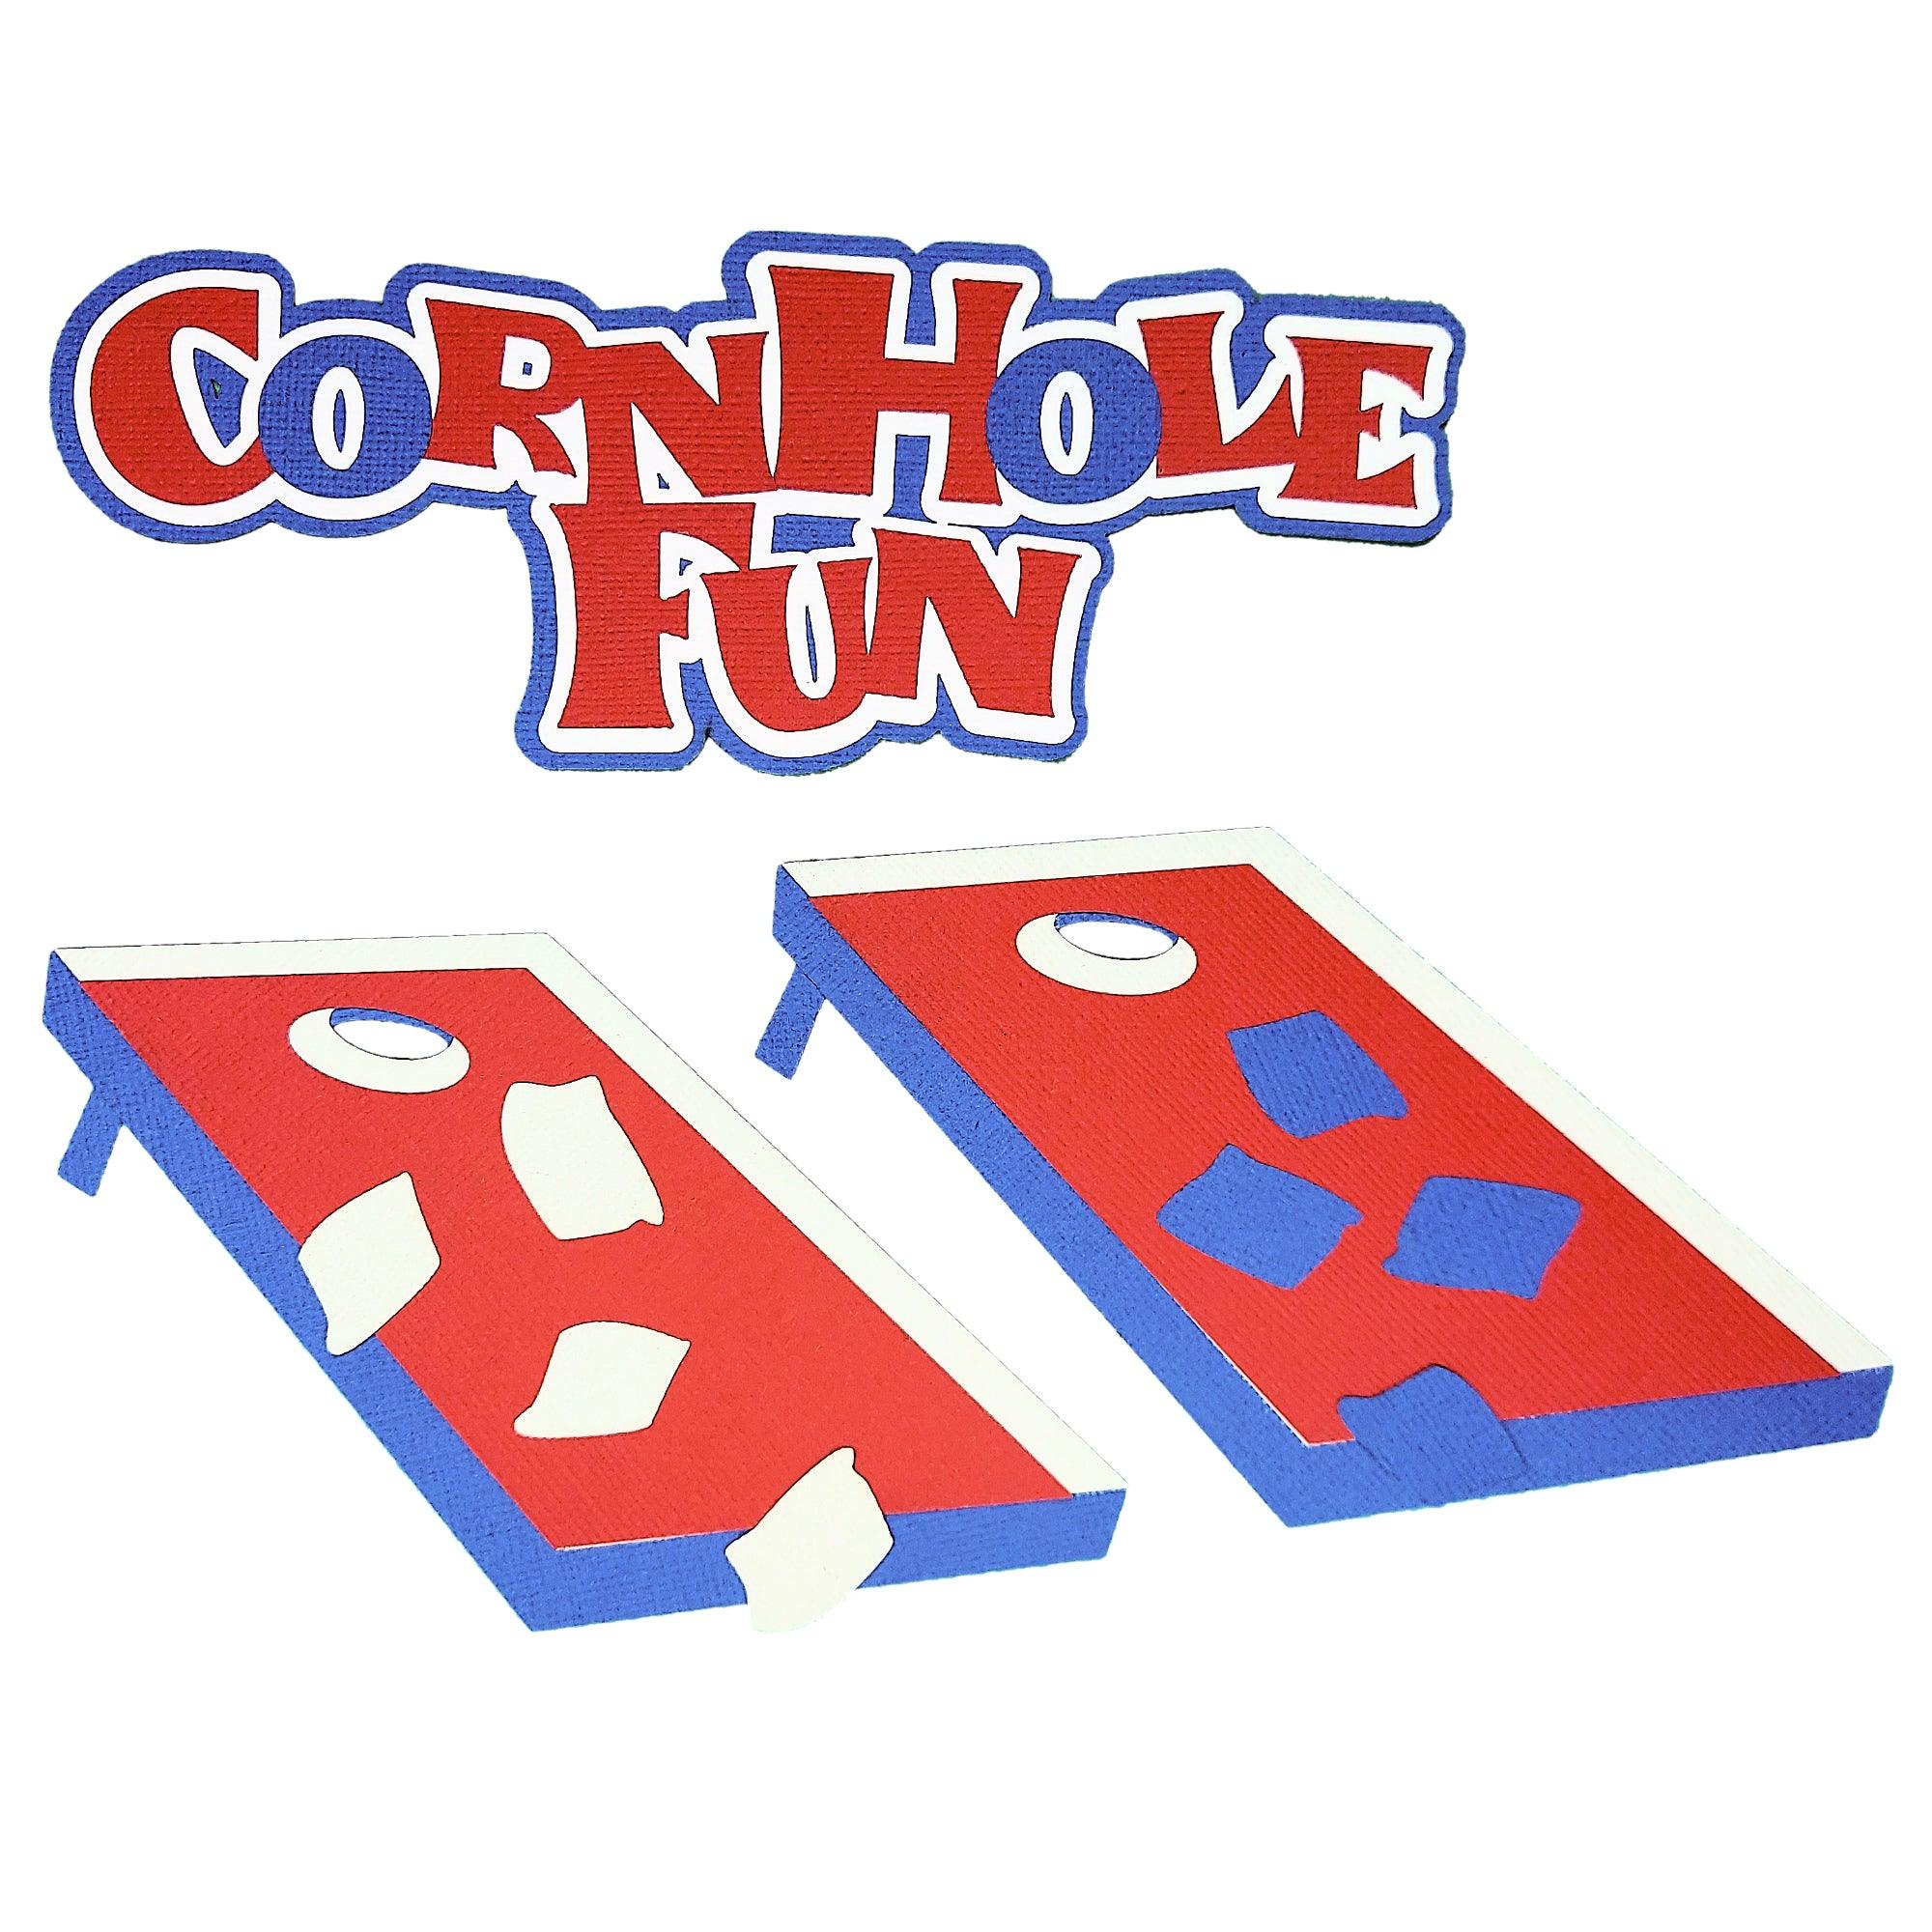 Cornhole Fun Collection Title, Boards, and Beanbags Fully-Assembled Laser Cut Scrapbook Embellishments by SSC Laser Designs